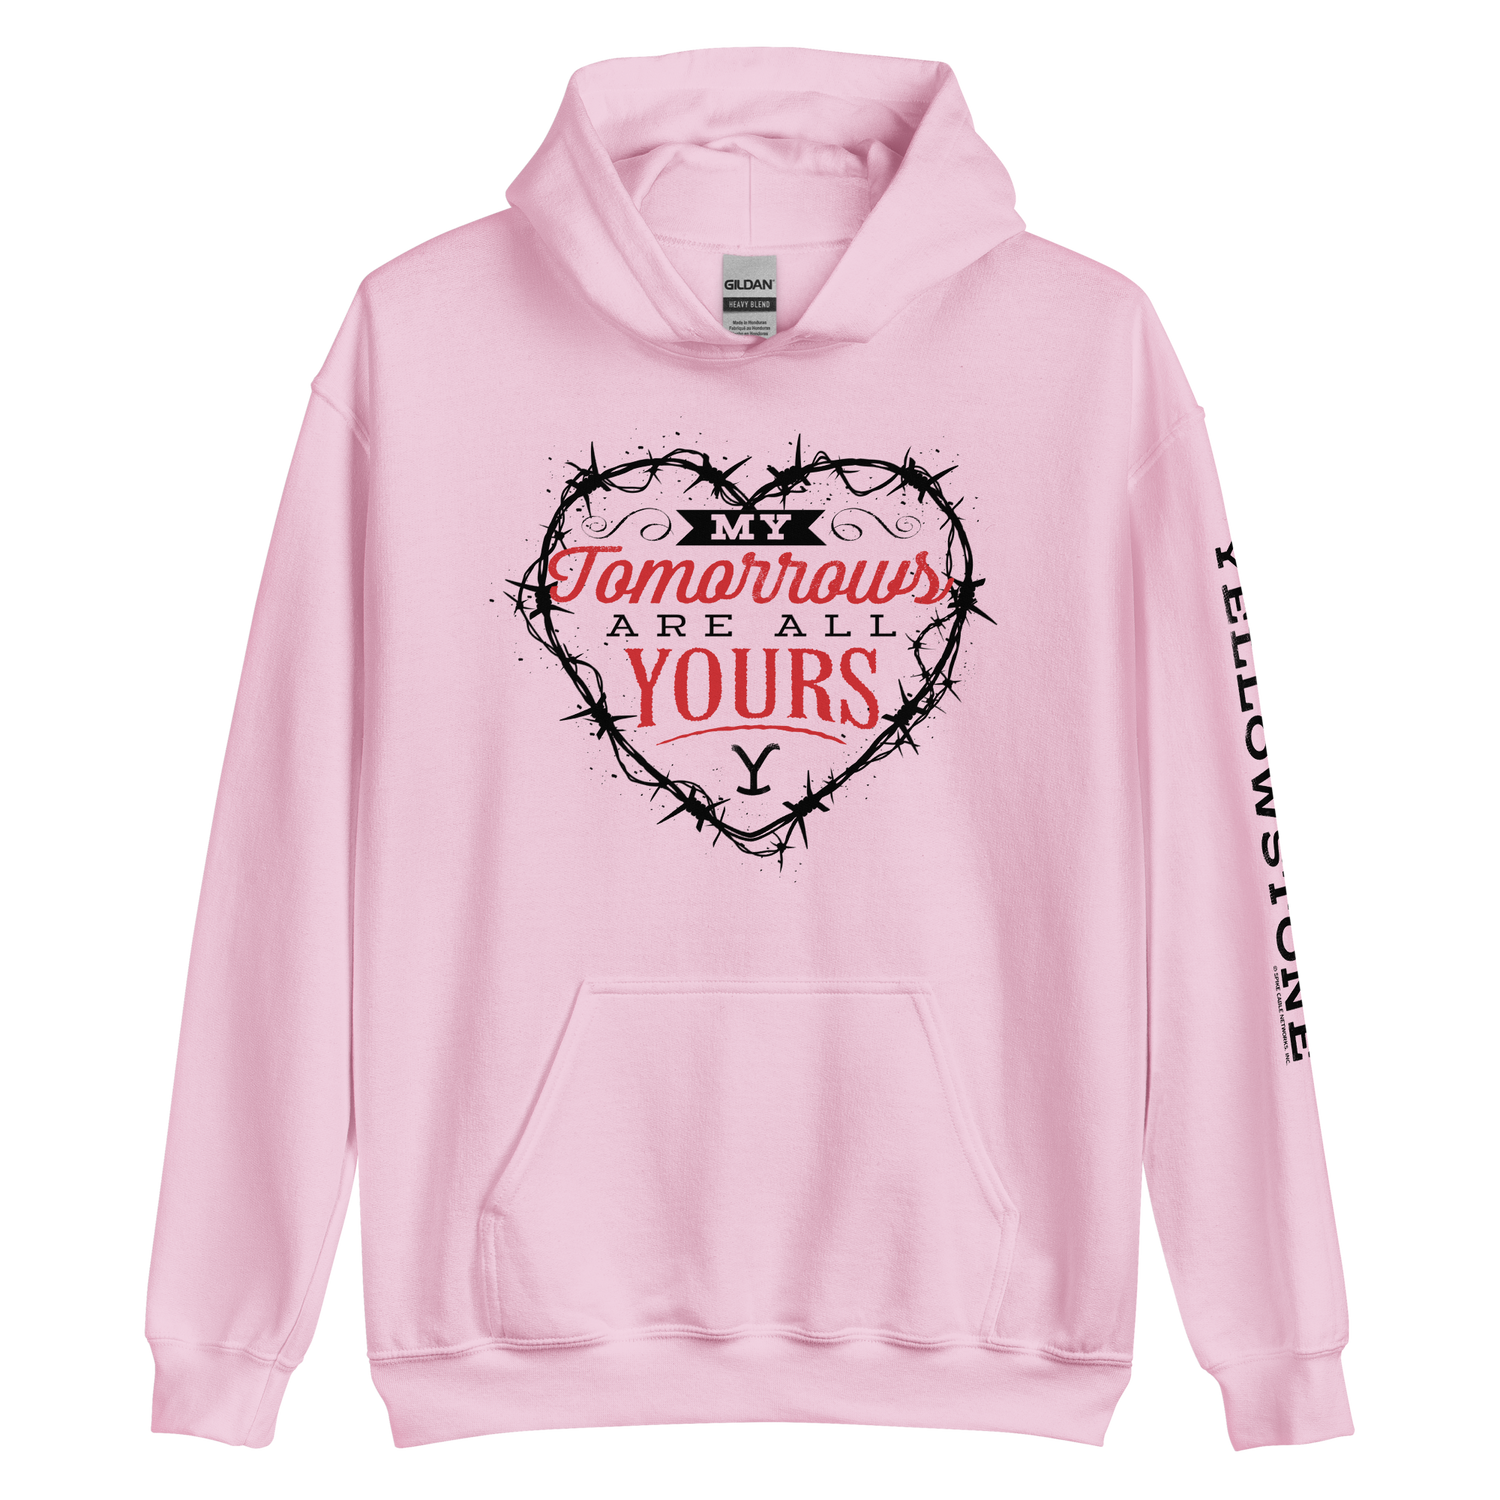 Yellowstone My Tomorrows Are All Yours Hooded Sweatshirt